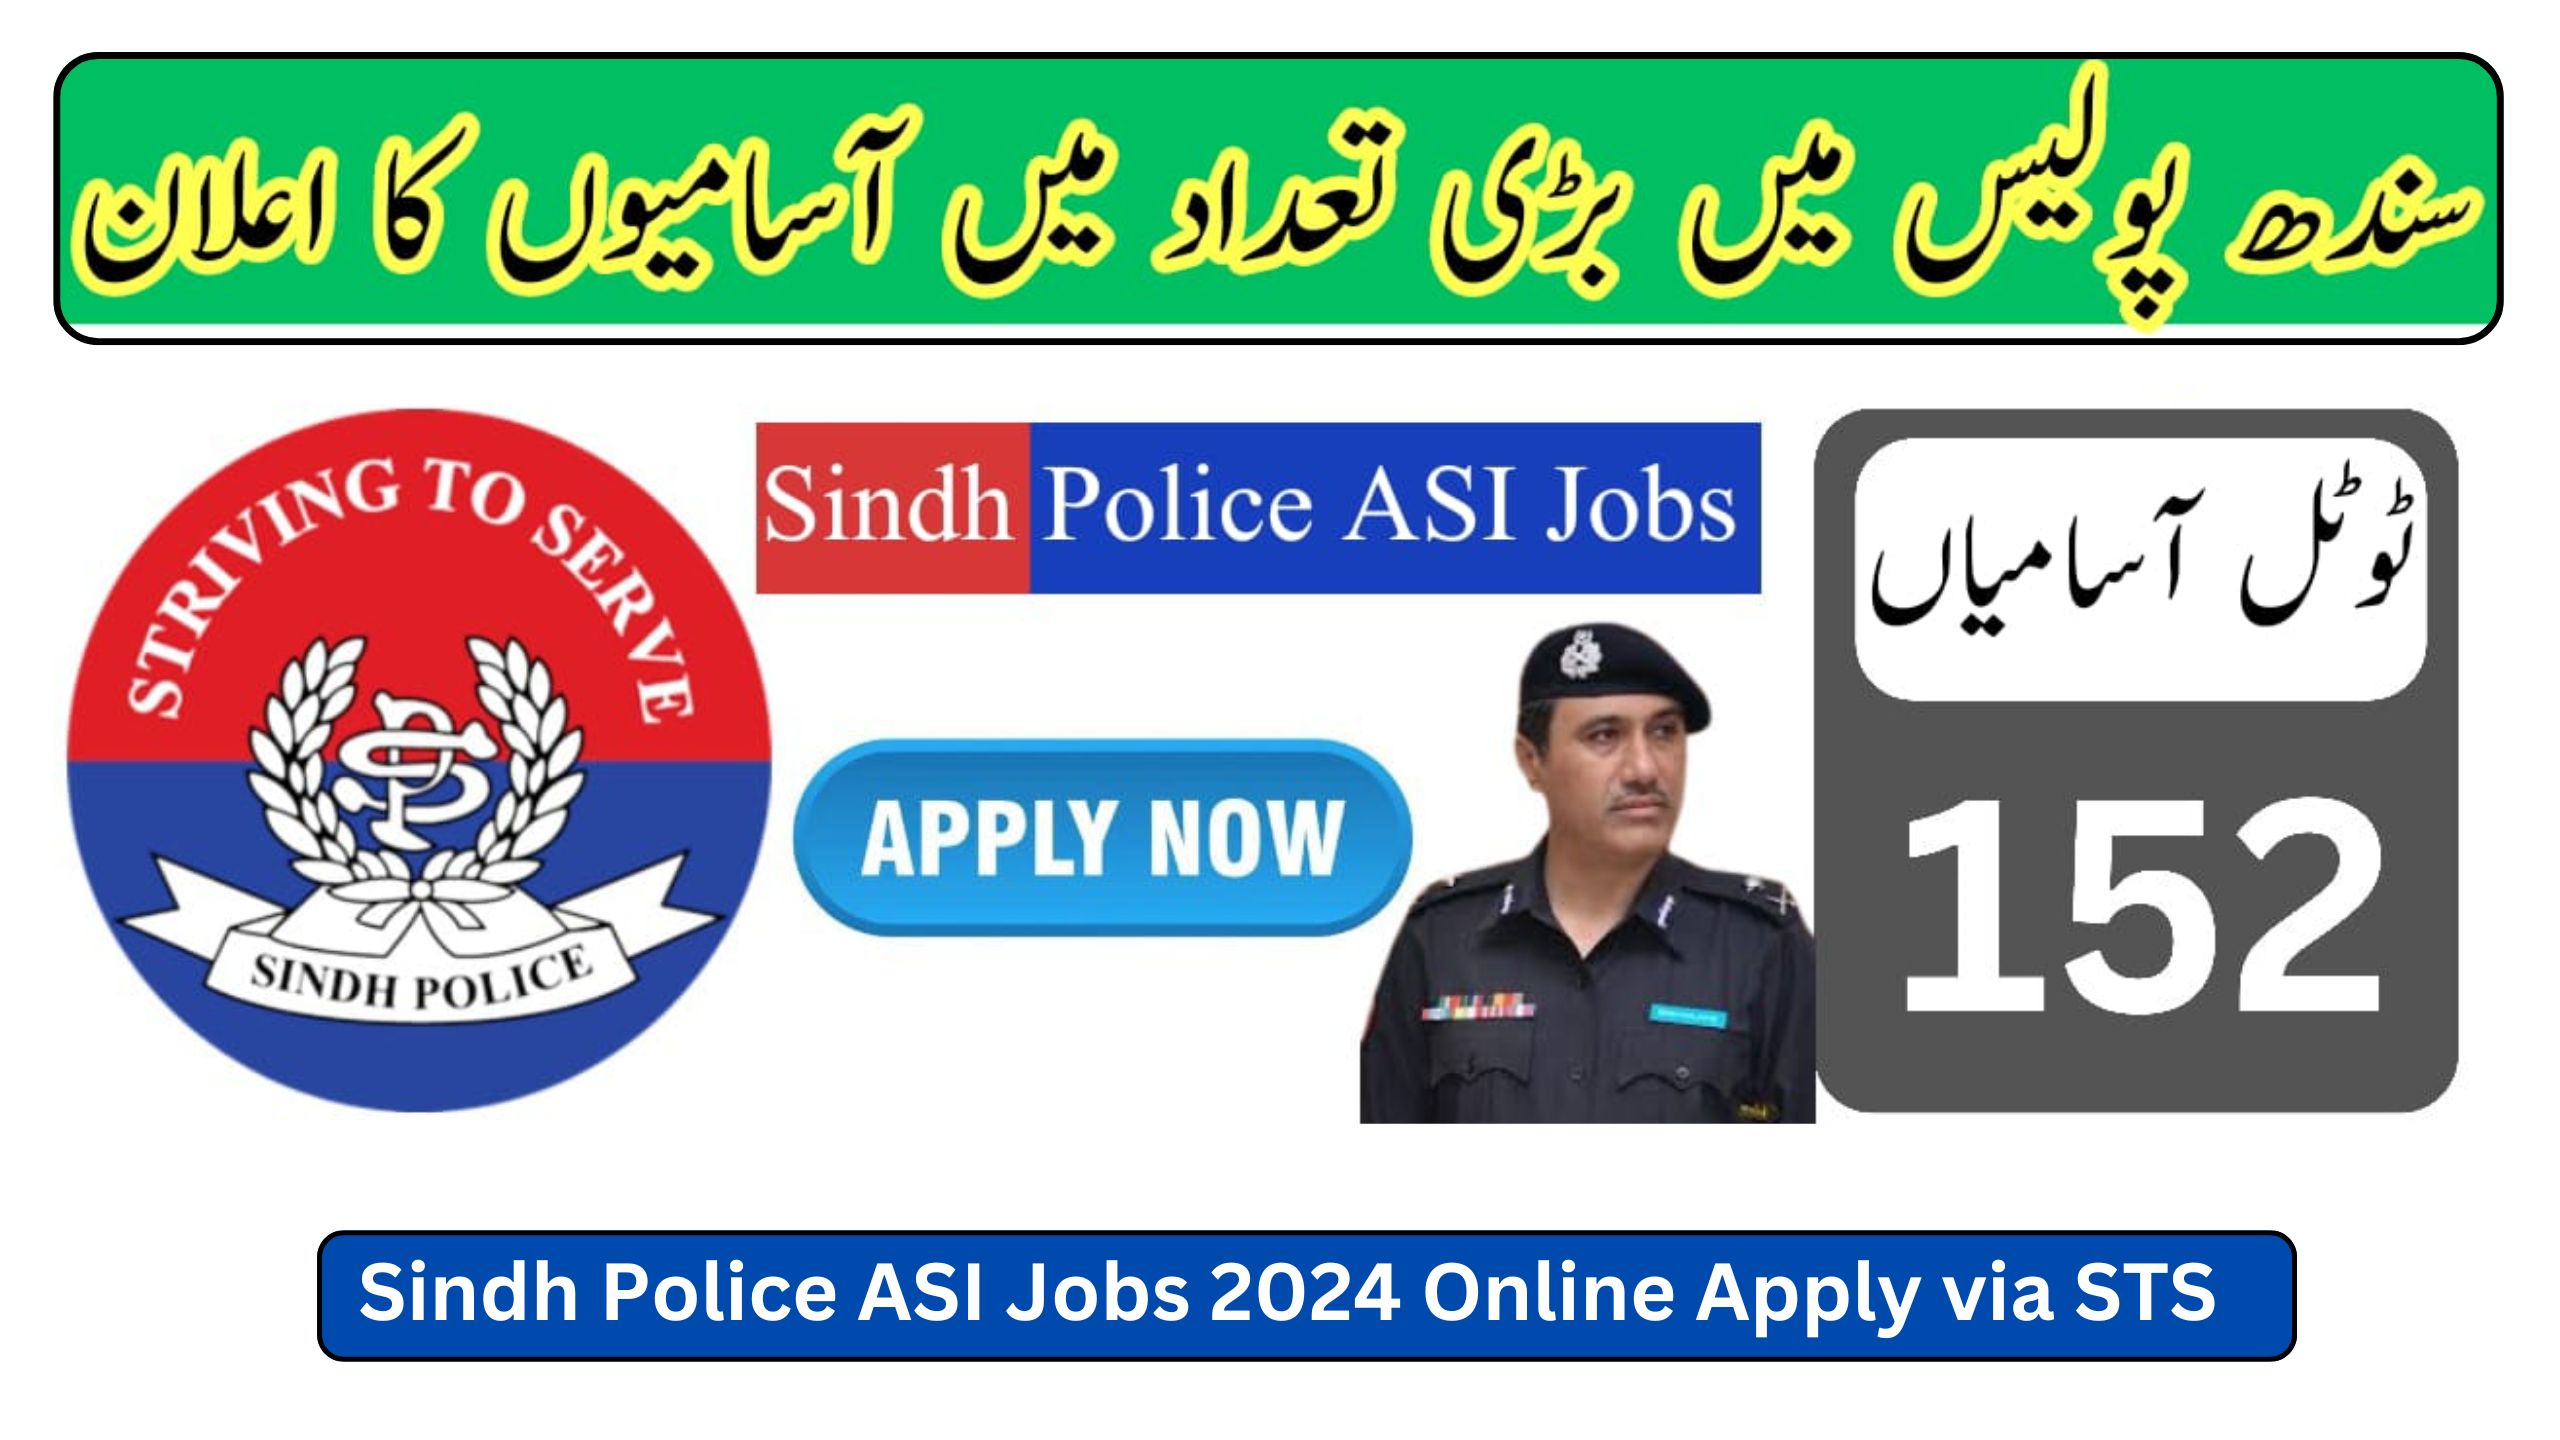 Sindh Police ASI Jobs 2024 Online Apply via STS